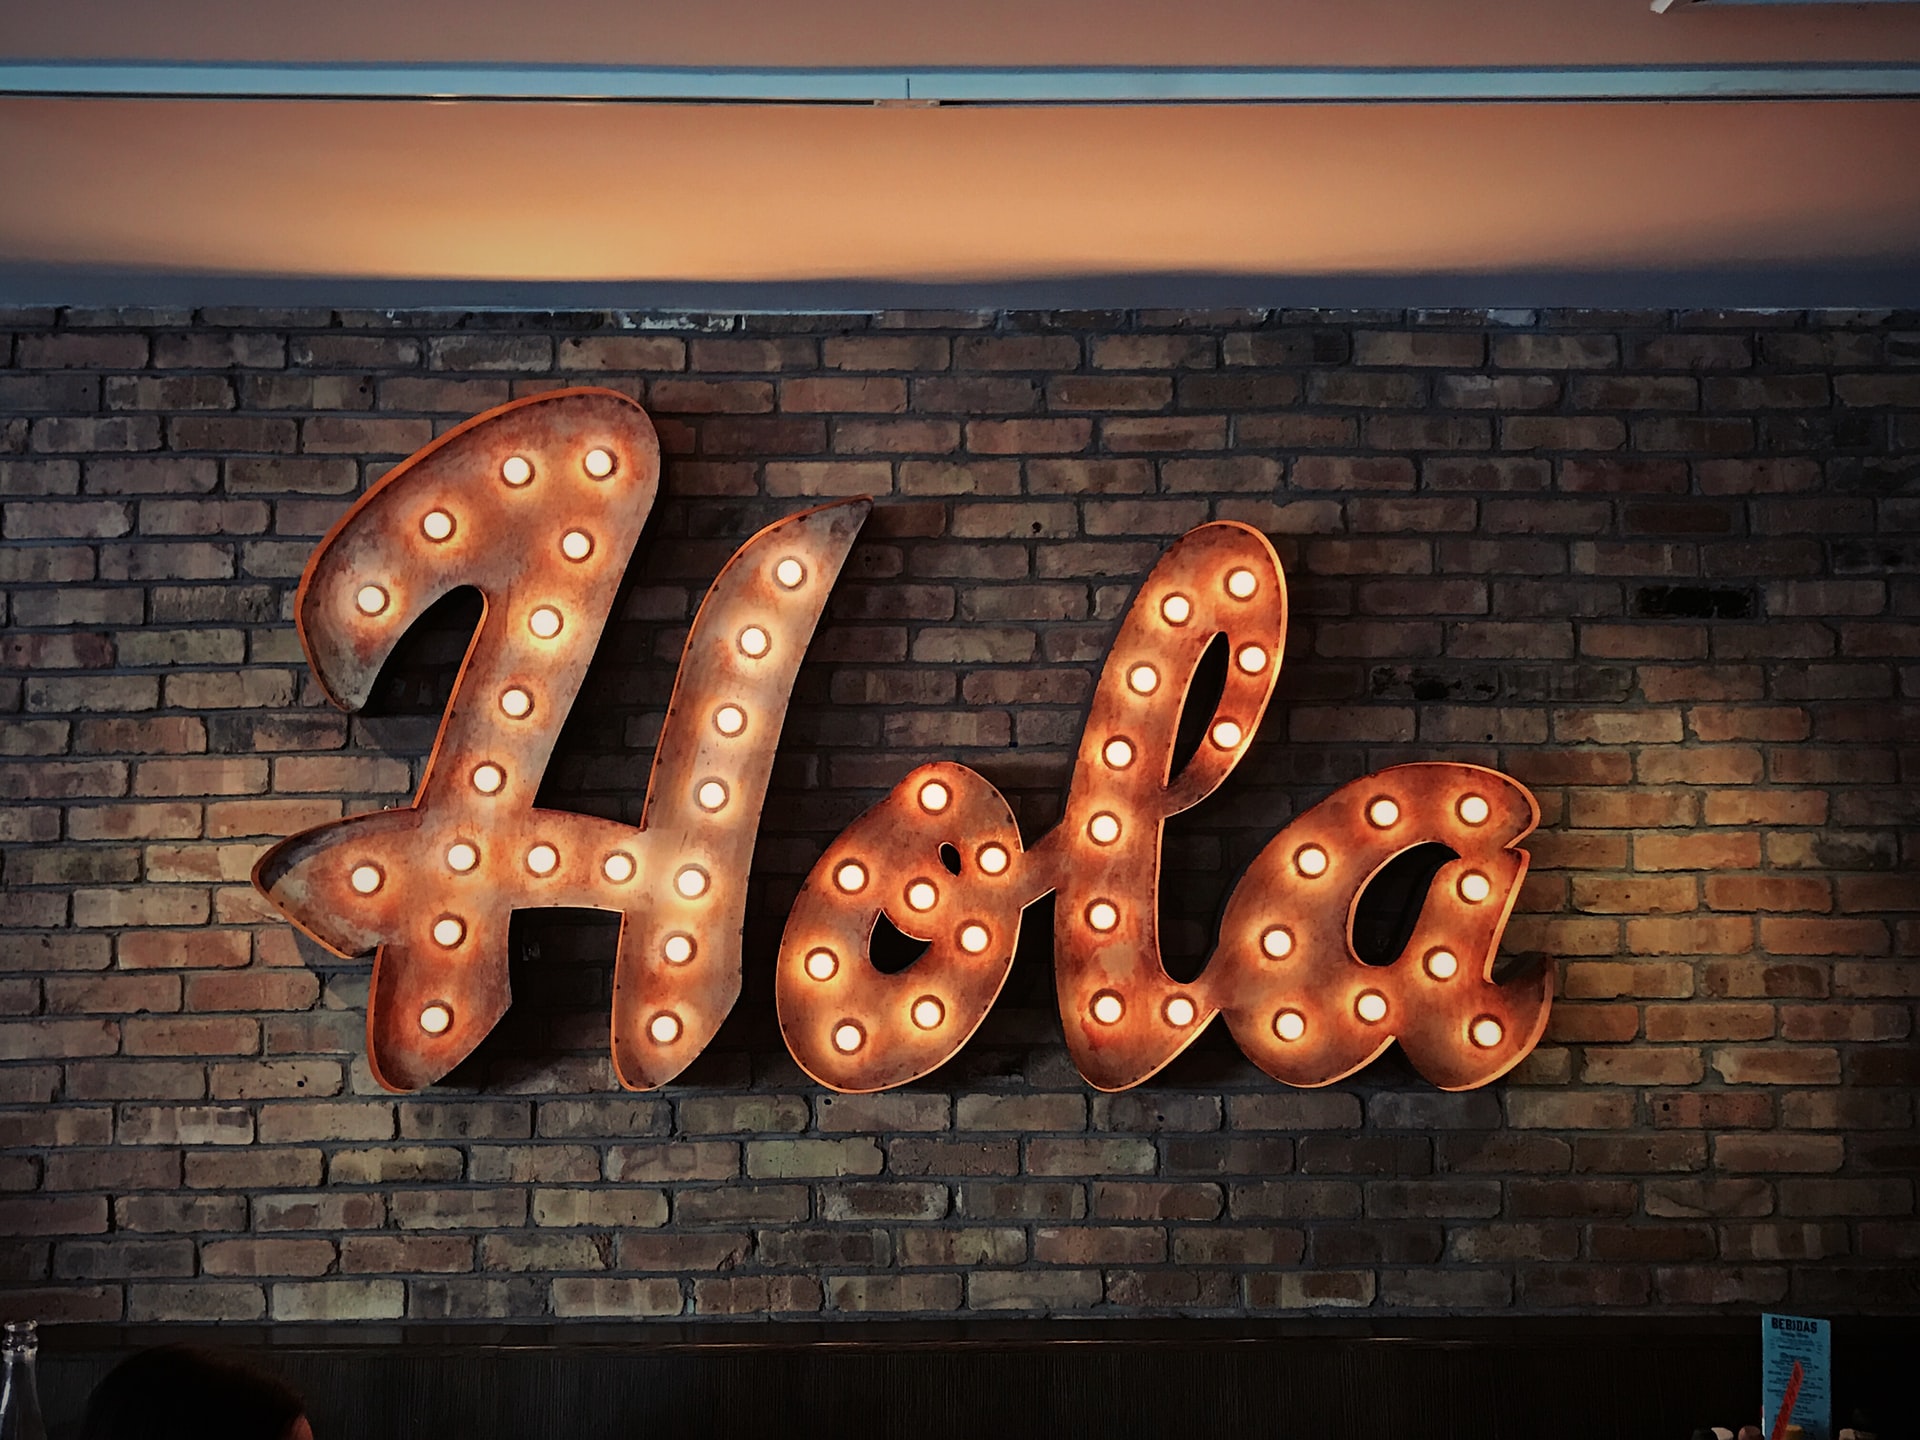 sign in lights which says Hola